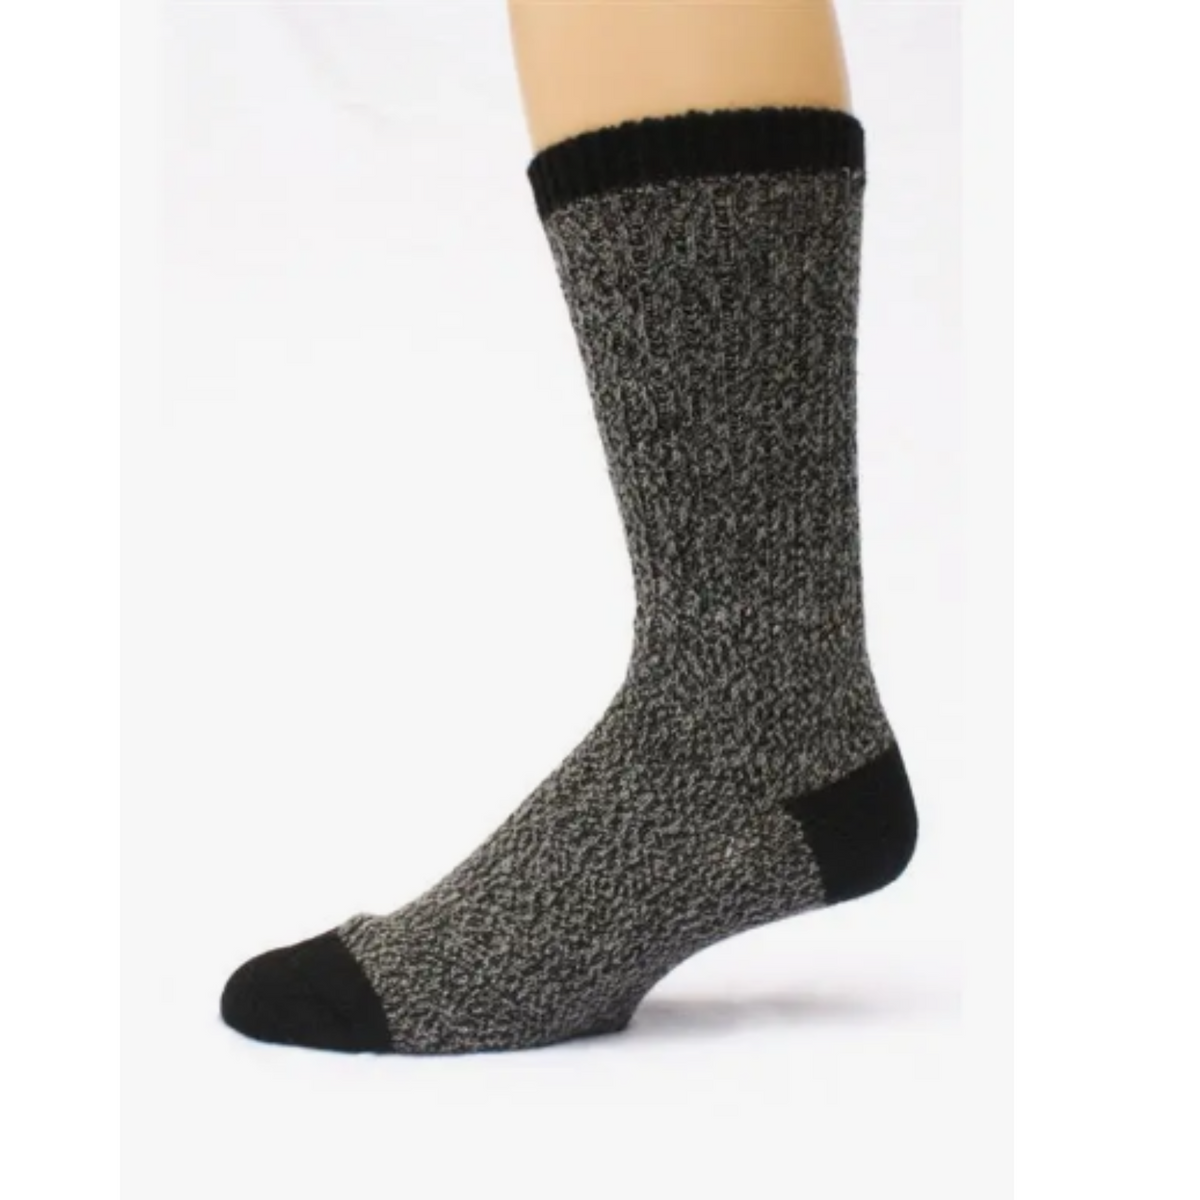 Choice Alpaca Products Boot women&#39;s and men&#39;s crew socks in Black on display foot